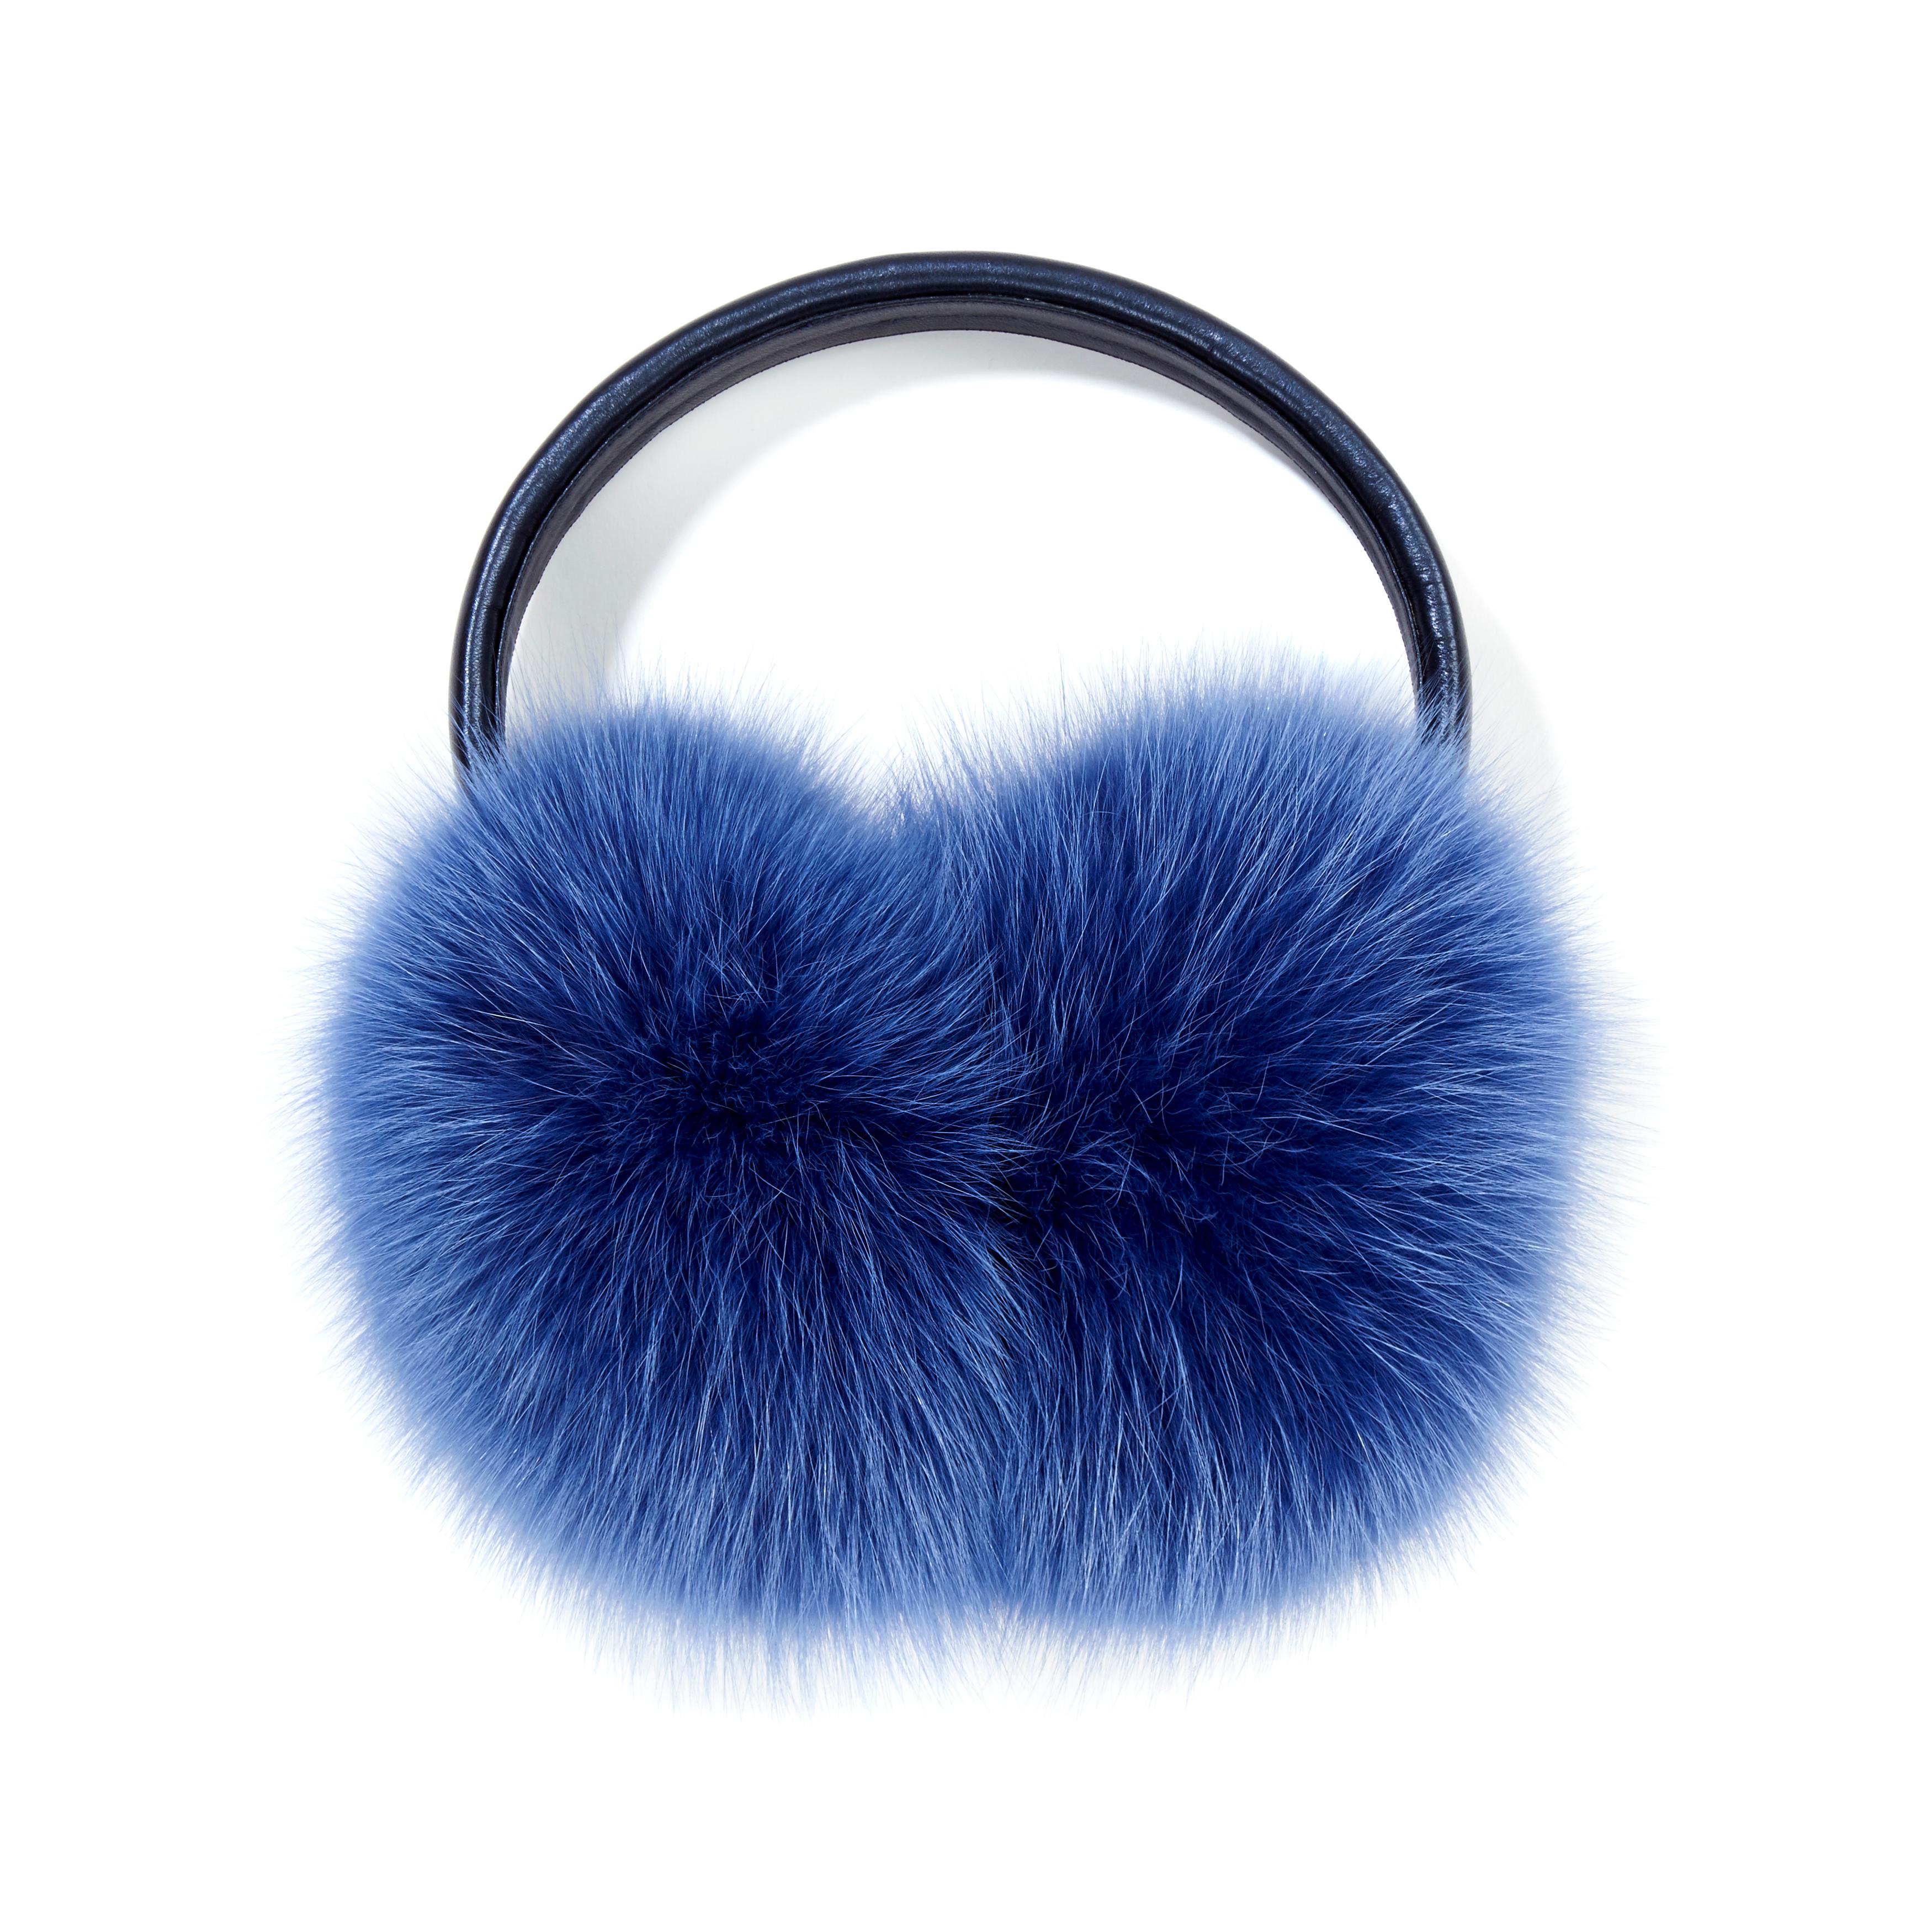 The perfect Christmas gift - Verheyen London Fox ear muffs are the perfect accessory for winter/autumn dressing. Stay cosy all winter in these luxurious and sumptuous ear muffs wherever you go.

All fur is origin assured and ethically sourced from